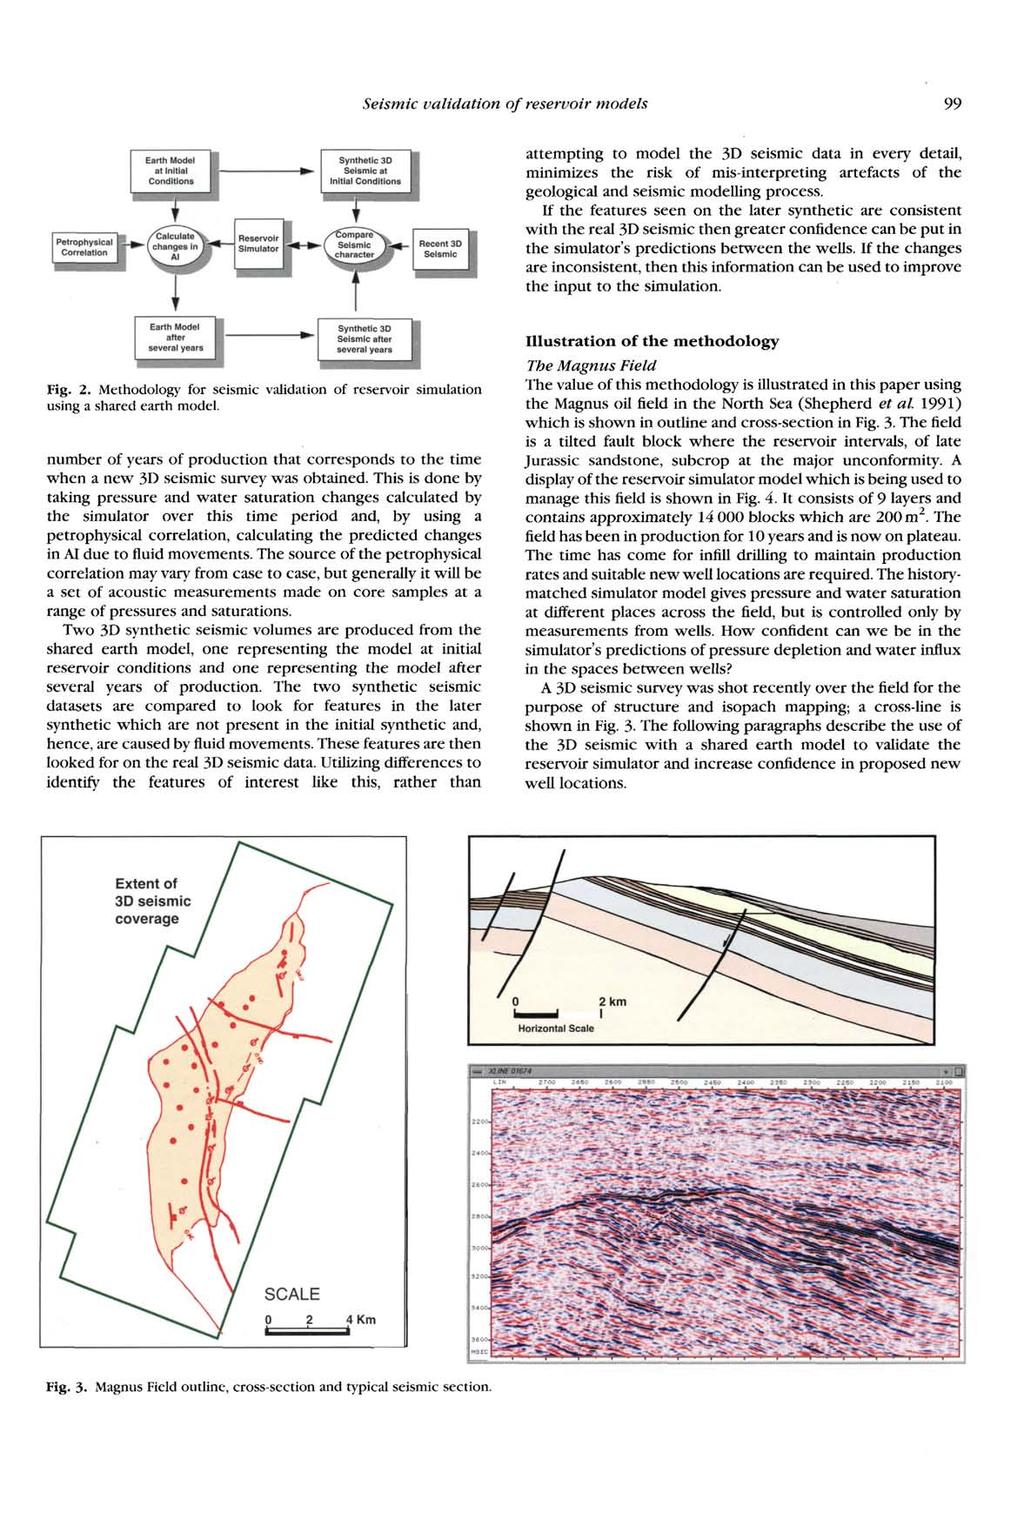 Seismic validation of reservoir models 99 Earth Model at Initial Conditions attempting to model the 3D seismic data in every detail, minimizes the risk of mis-interpreting artefacts of the geological